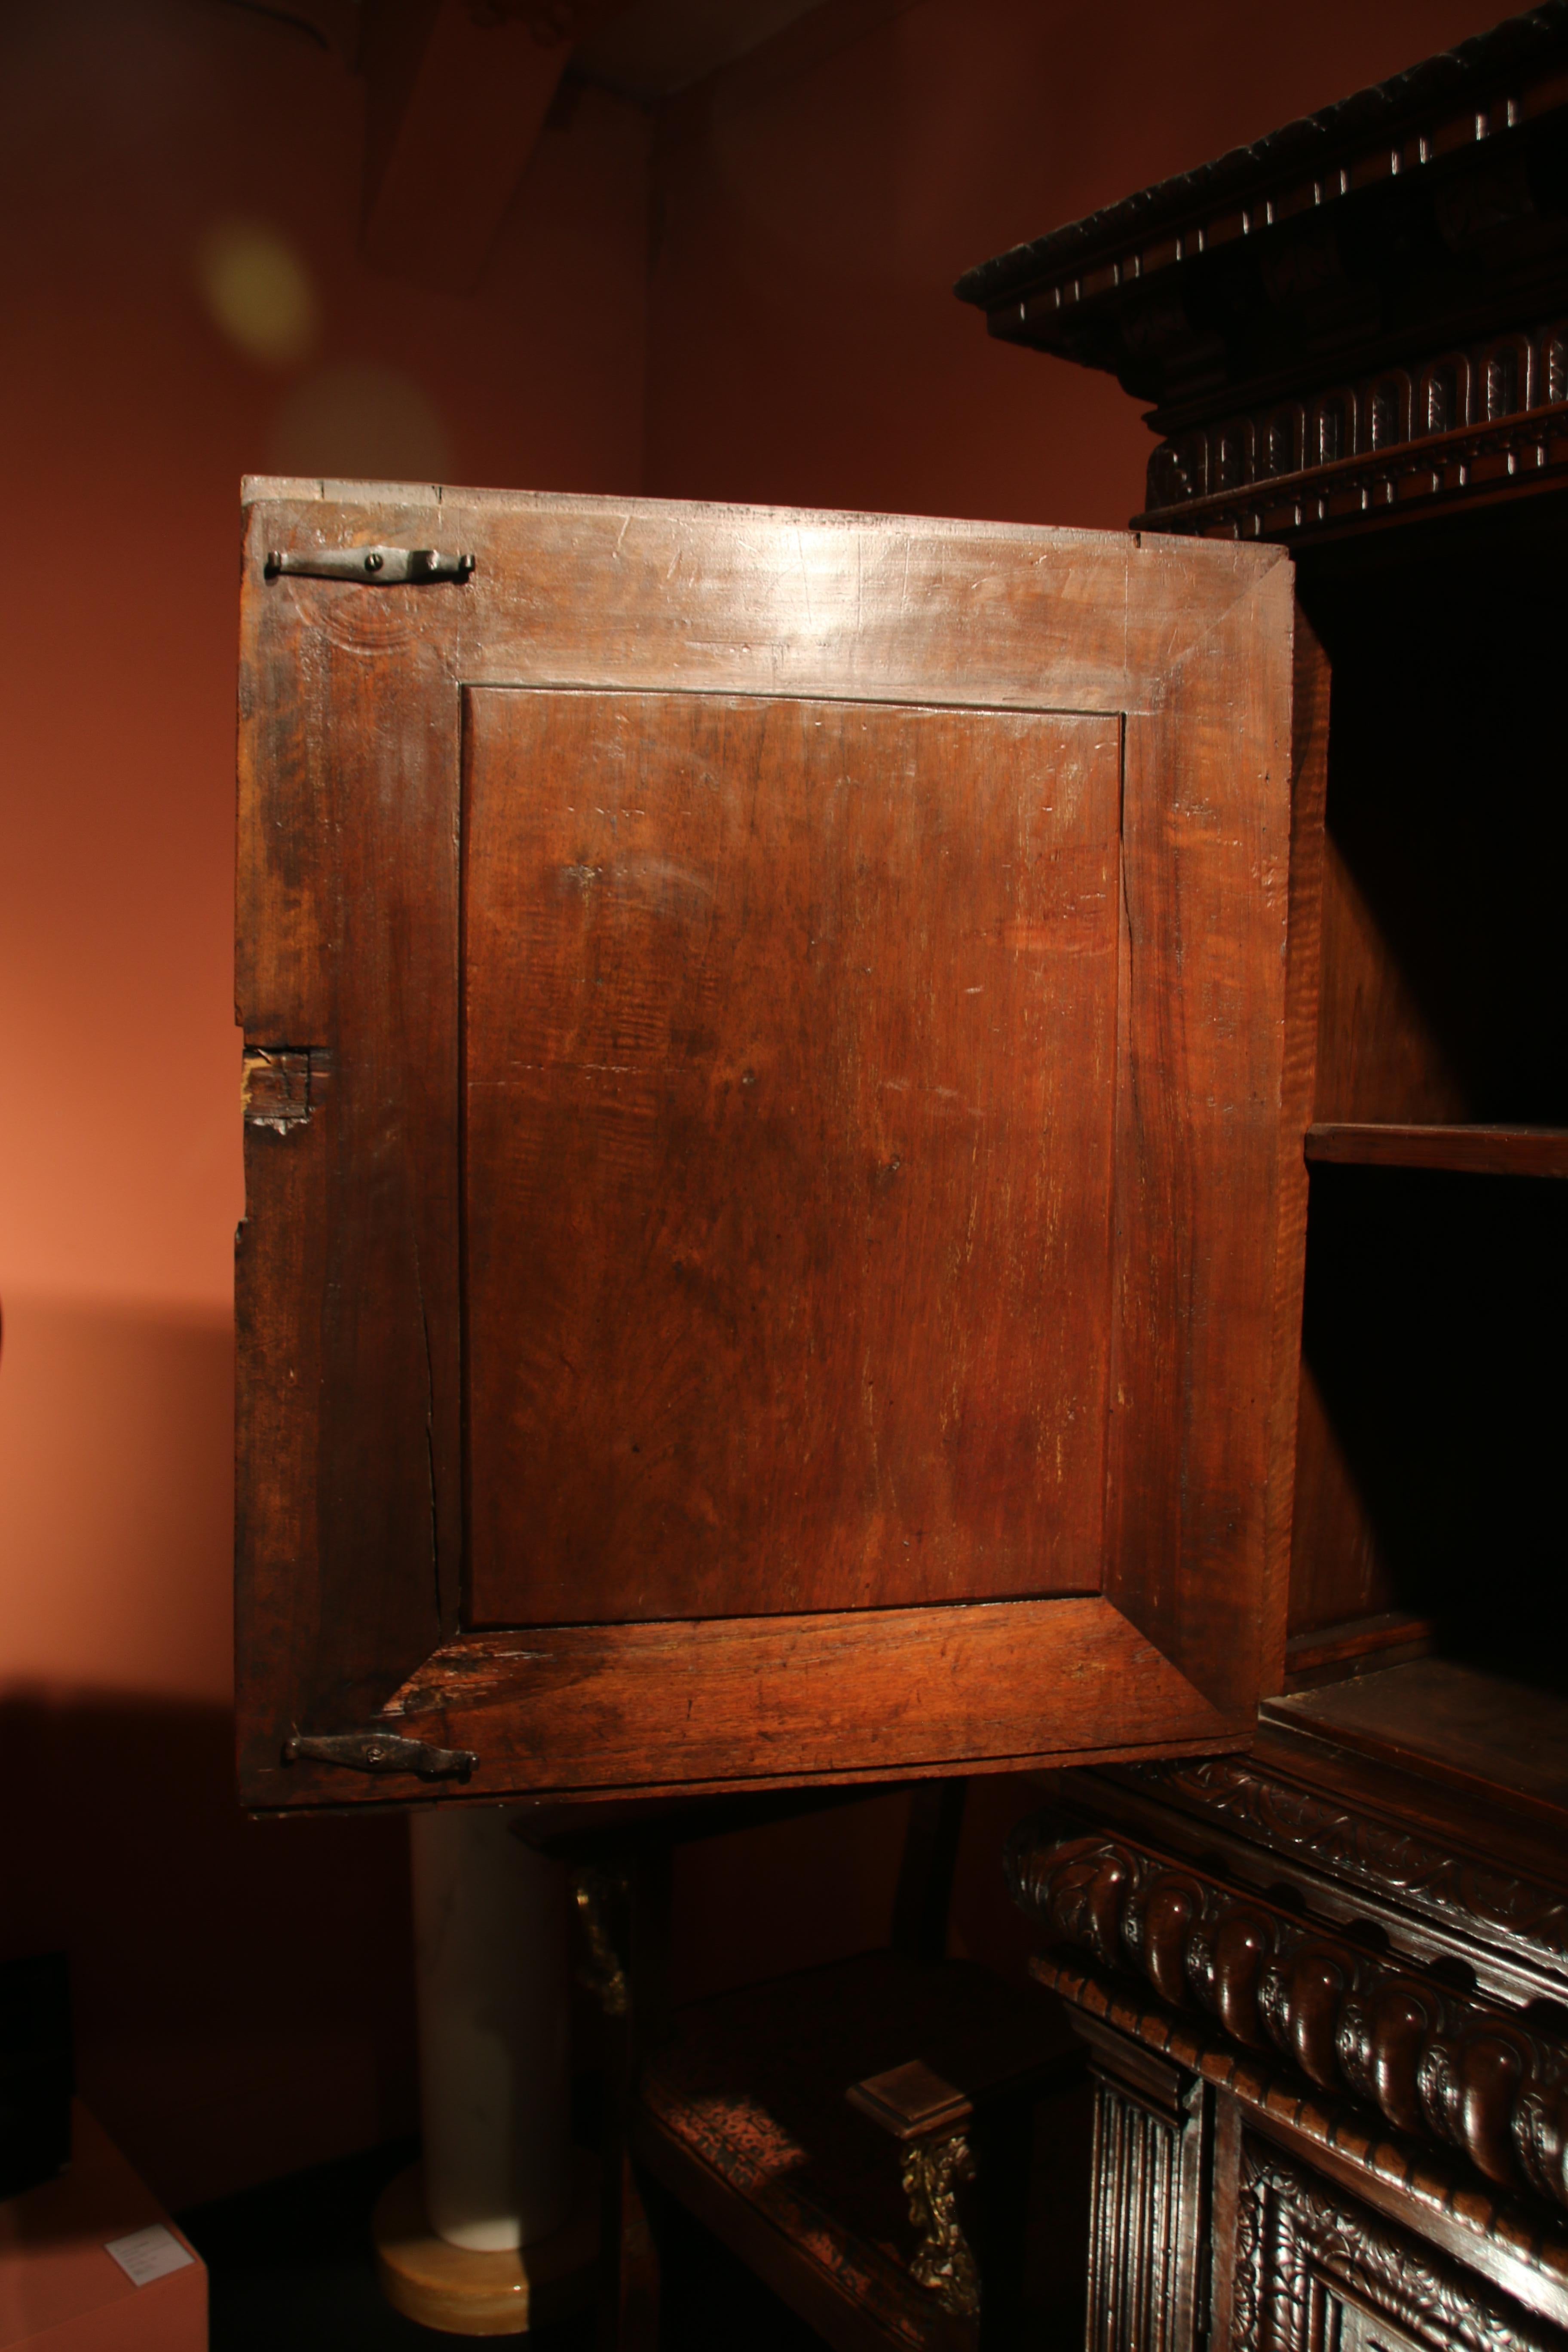 Walnut 16th Century French Renaissance Cabinet with Perspective Carving